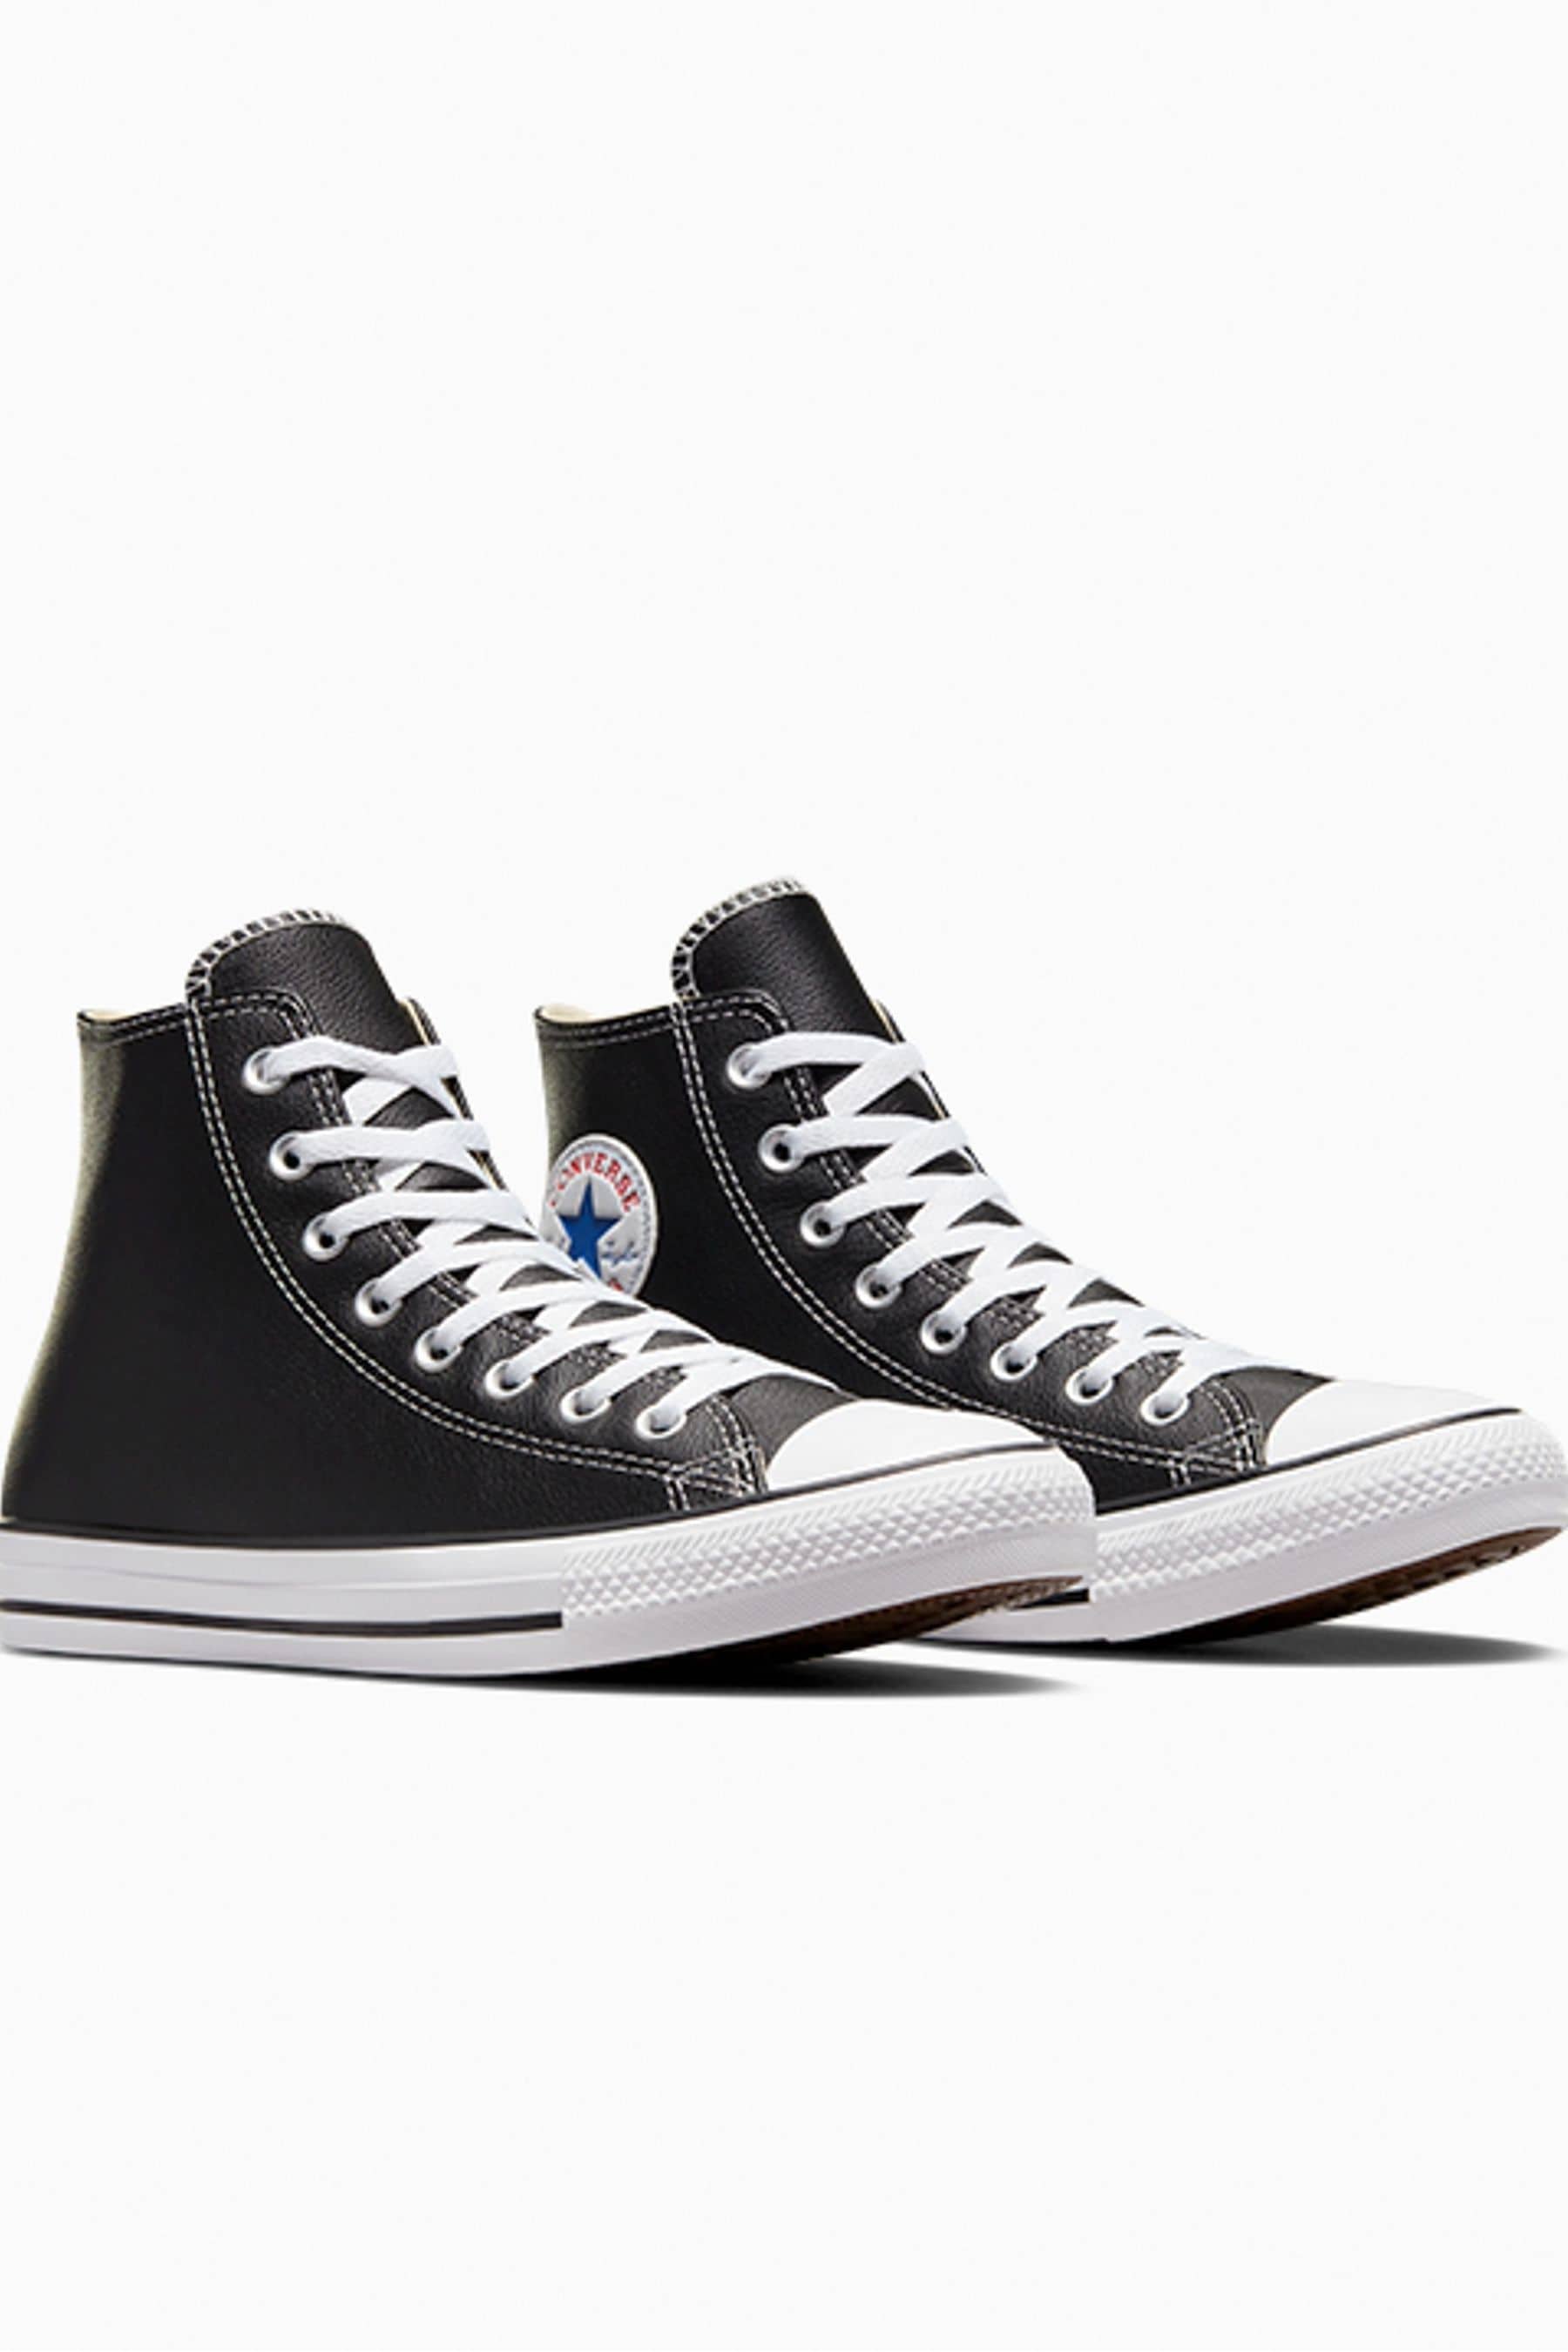 Buy Converse Black Leather High Trainers from the Next UK online shop